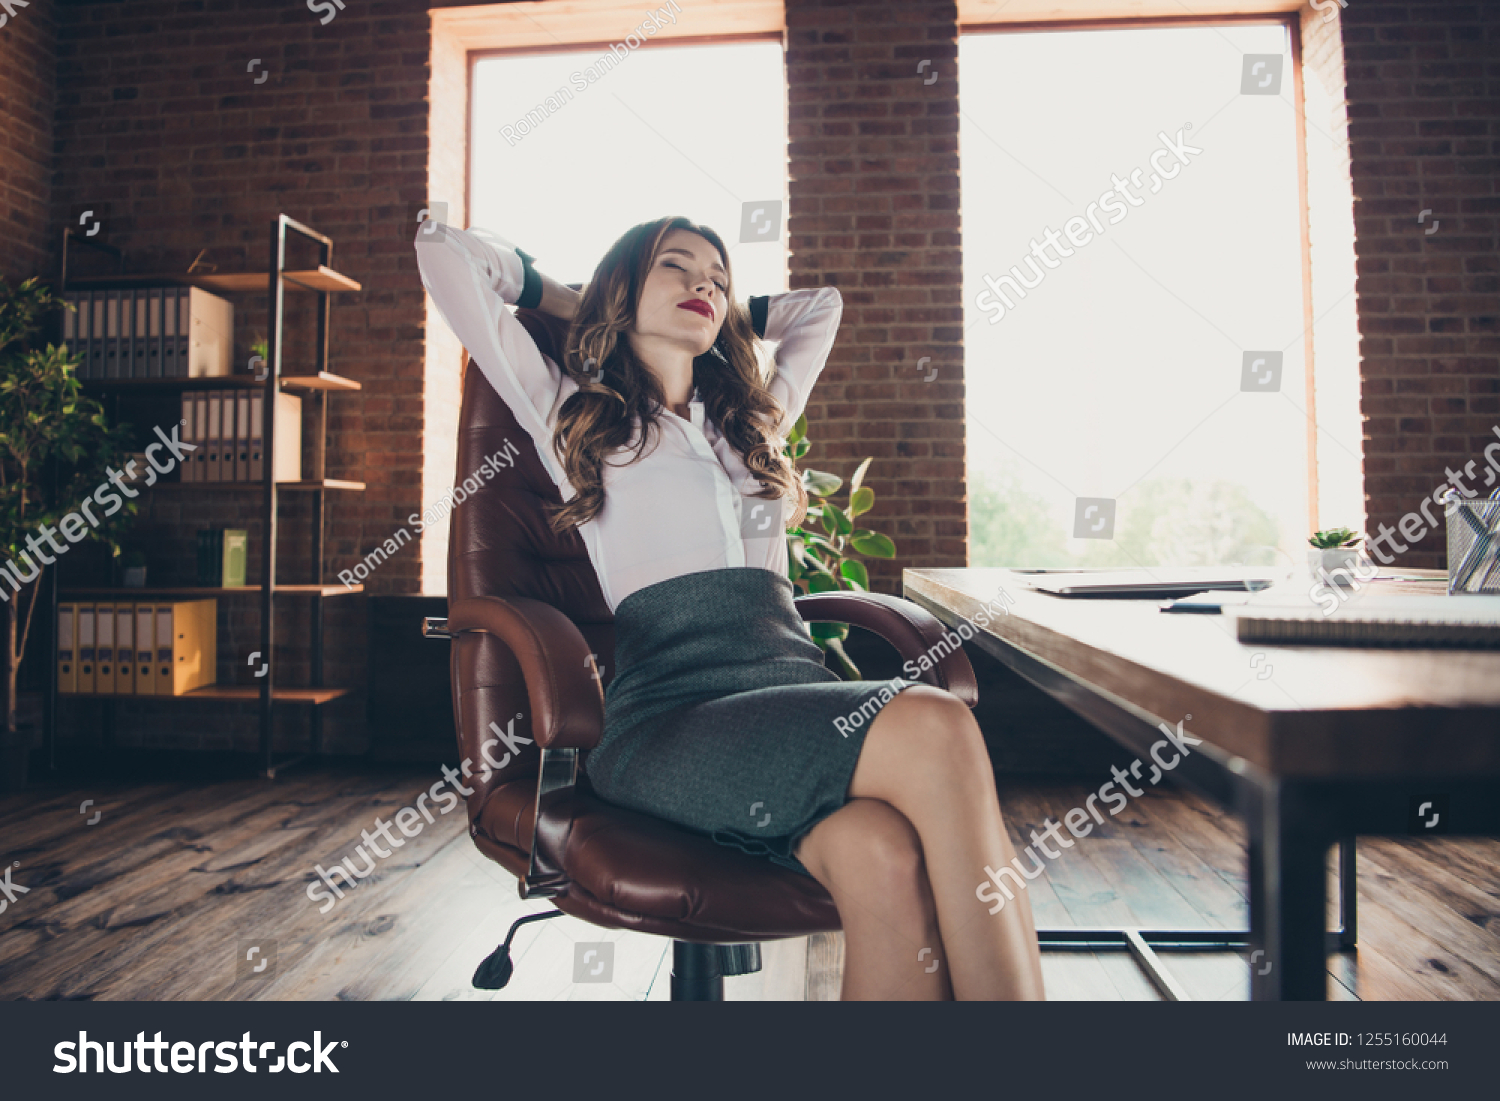 Low below angle view of nice lovely elegant classy attractive adorable charming wavy-haired lady closed eyes sitting in chair at work place station open space #1255160044